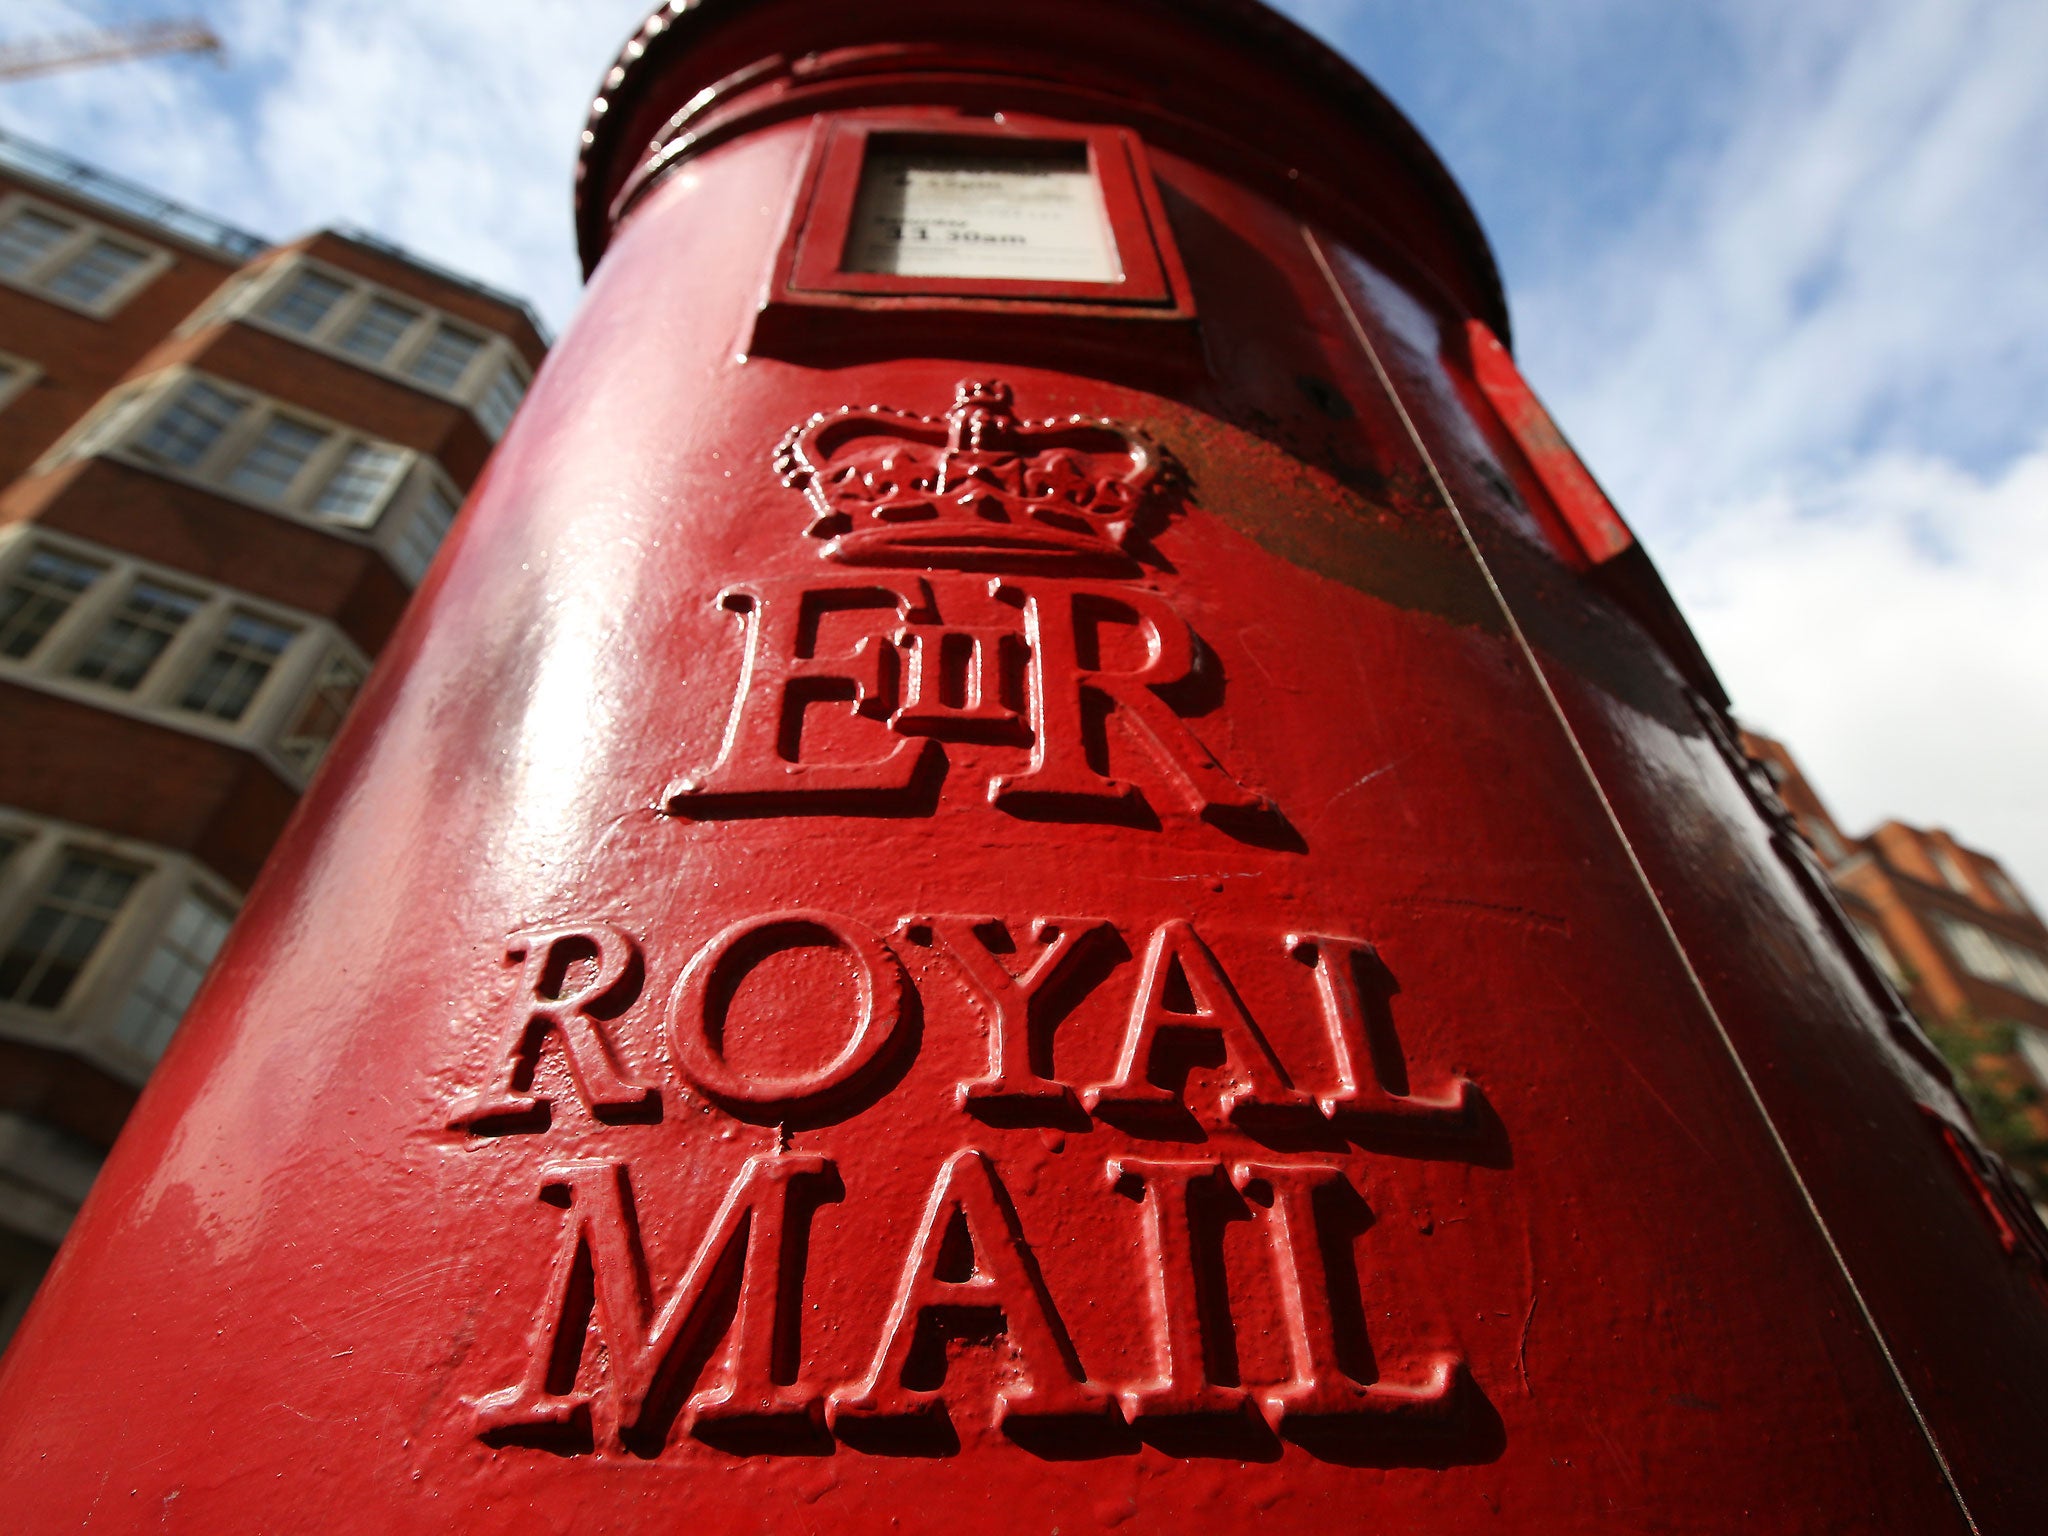 Regulator Ofgem has told the Royal Mail it must improve services after missing key performance targets, warning of possible fines if it does not improve